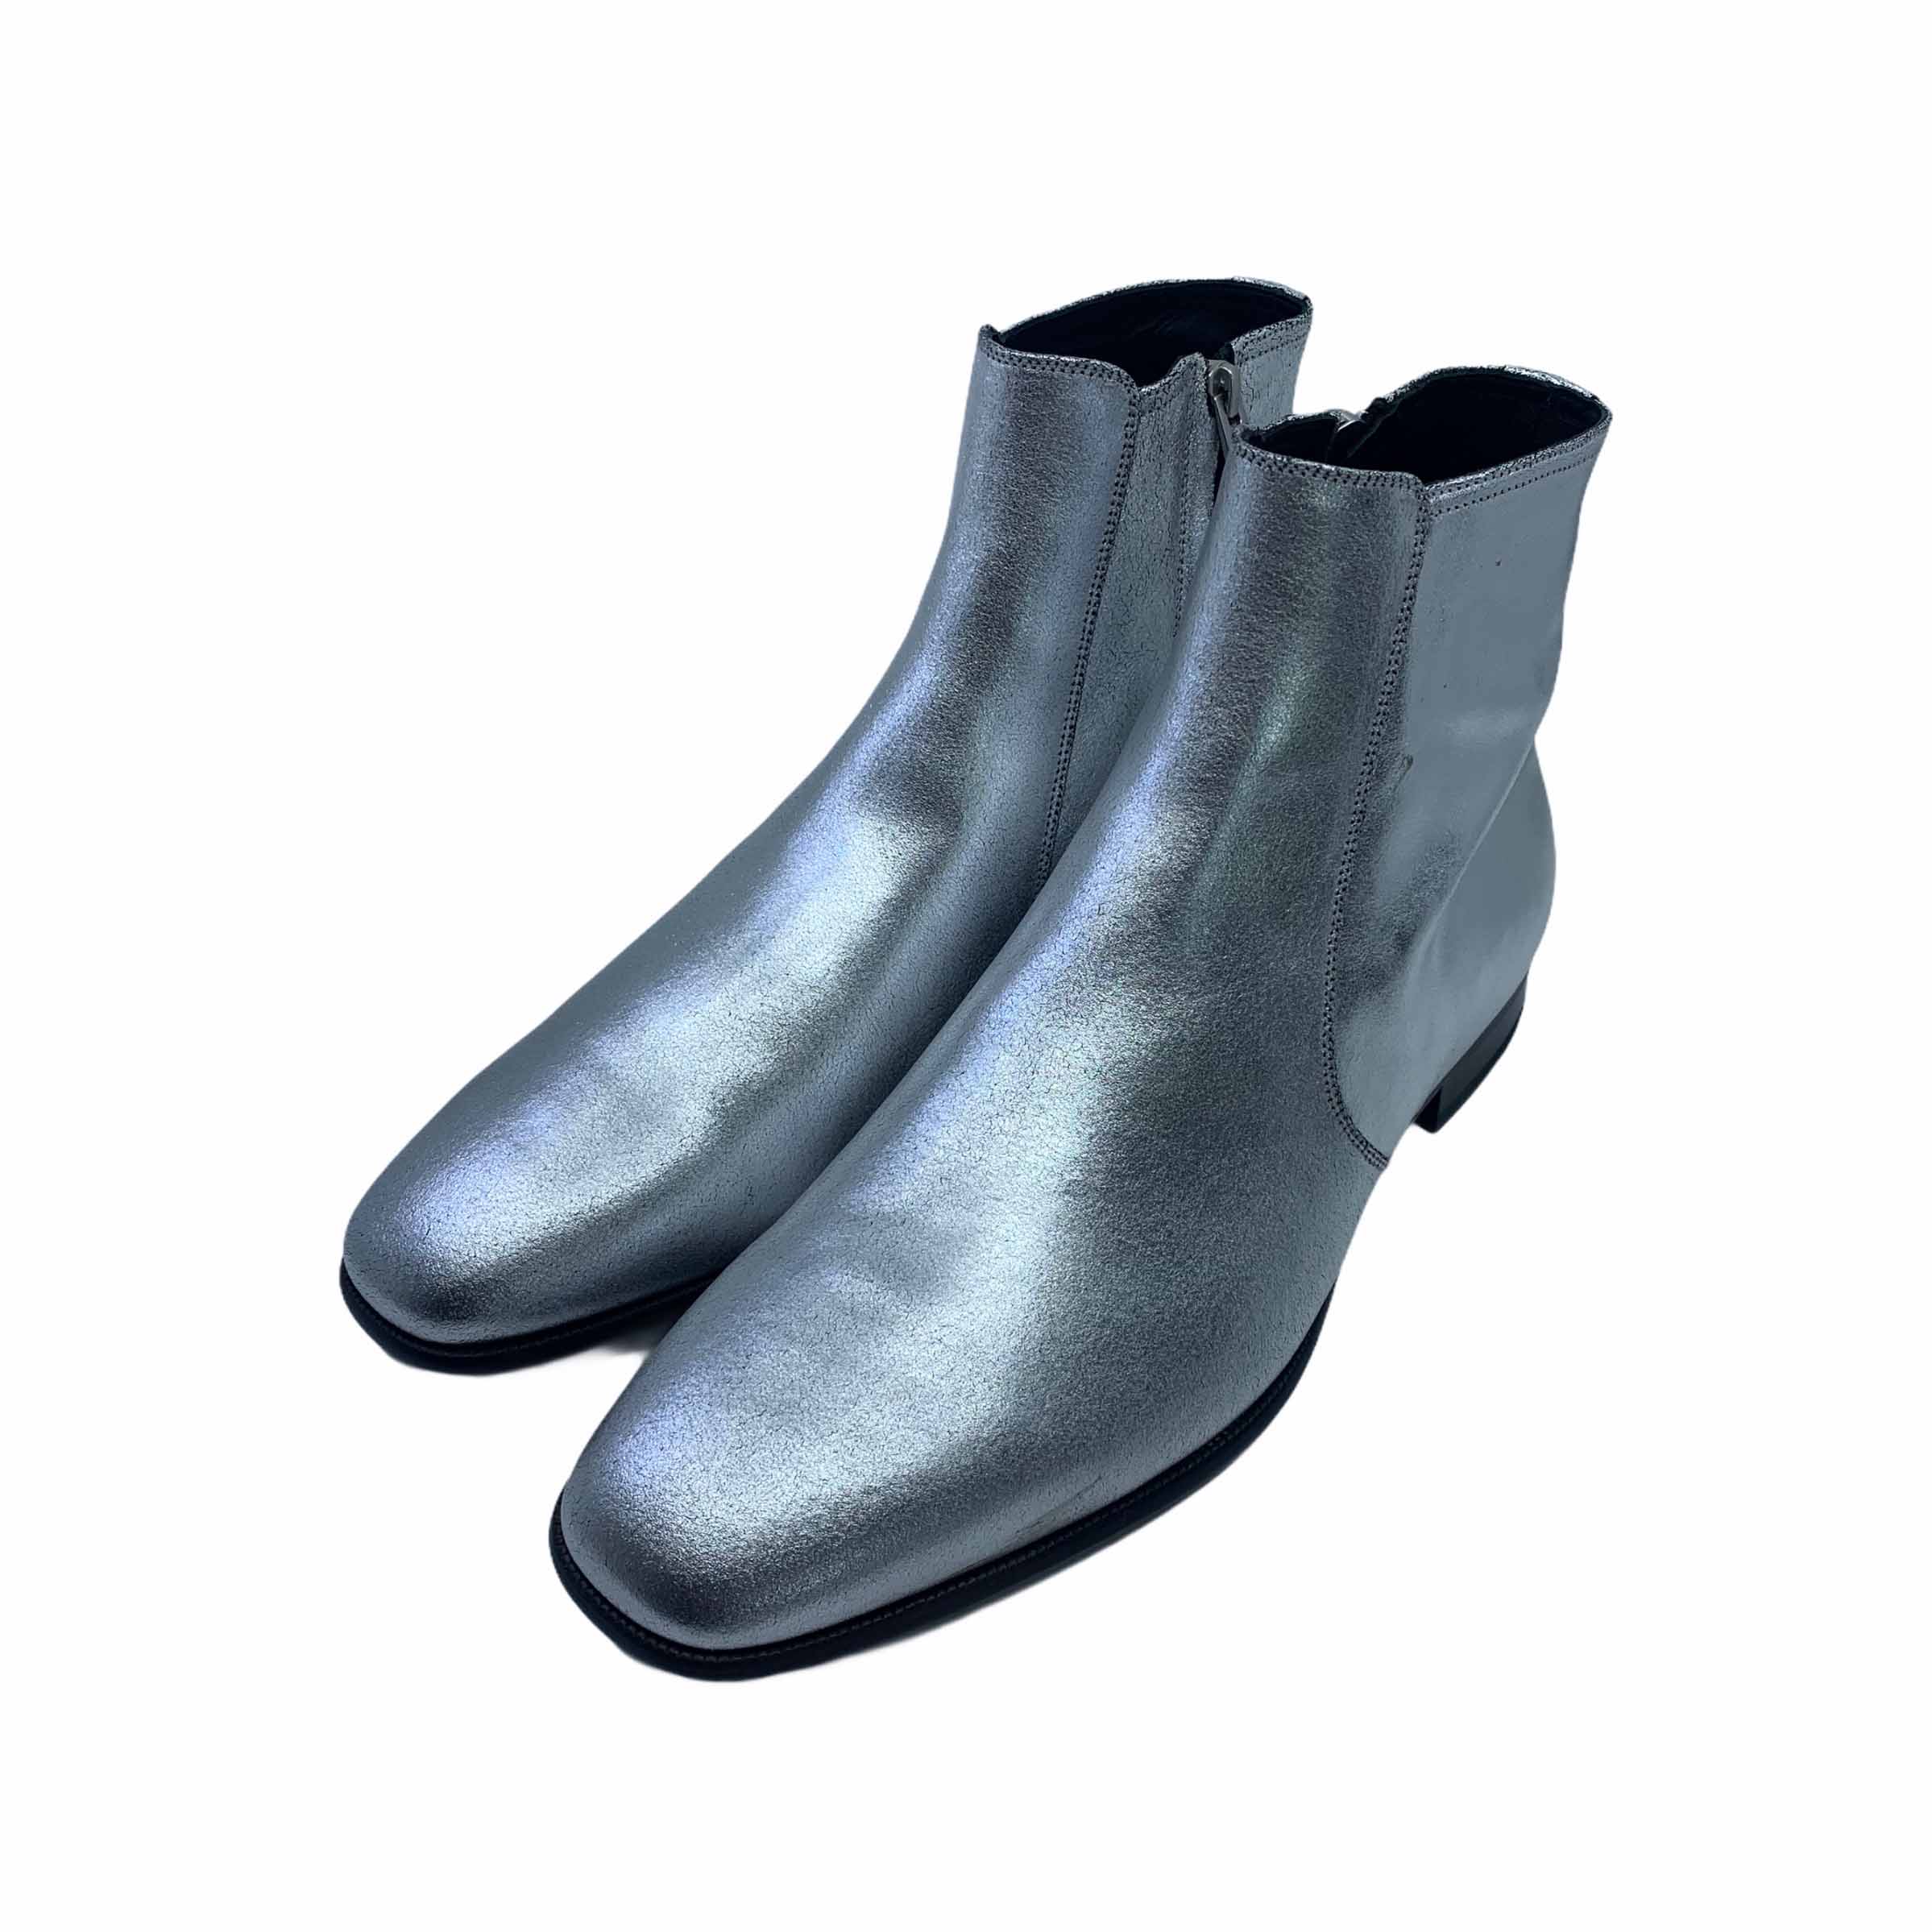 [Tom Ford] Metalic Silver Plated Chelsea Boots - Size US10